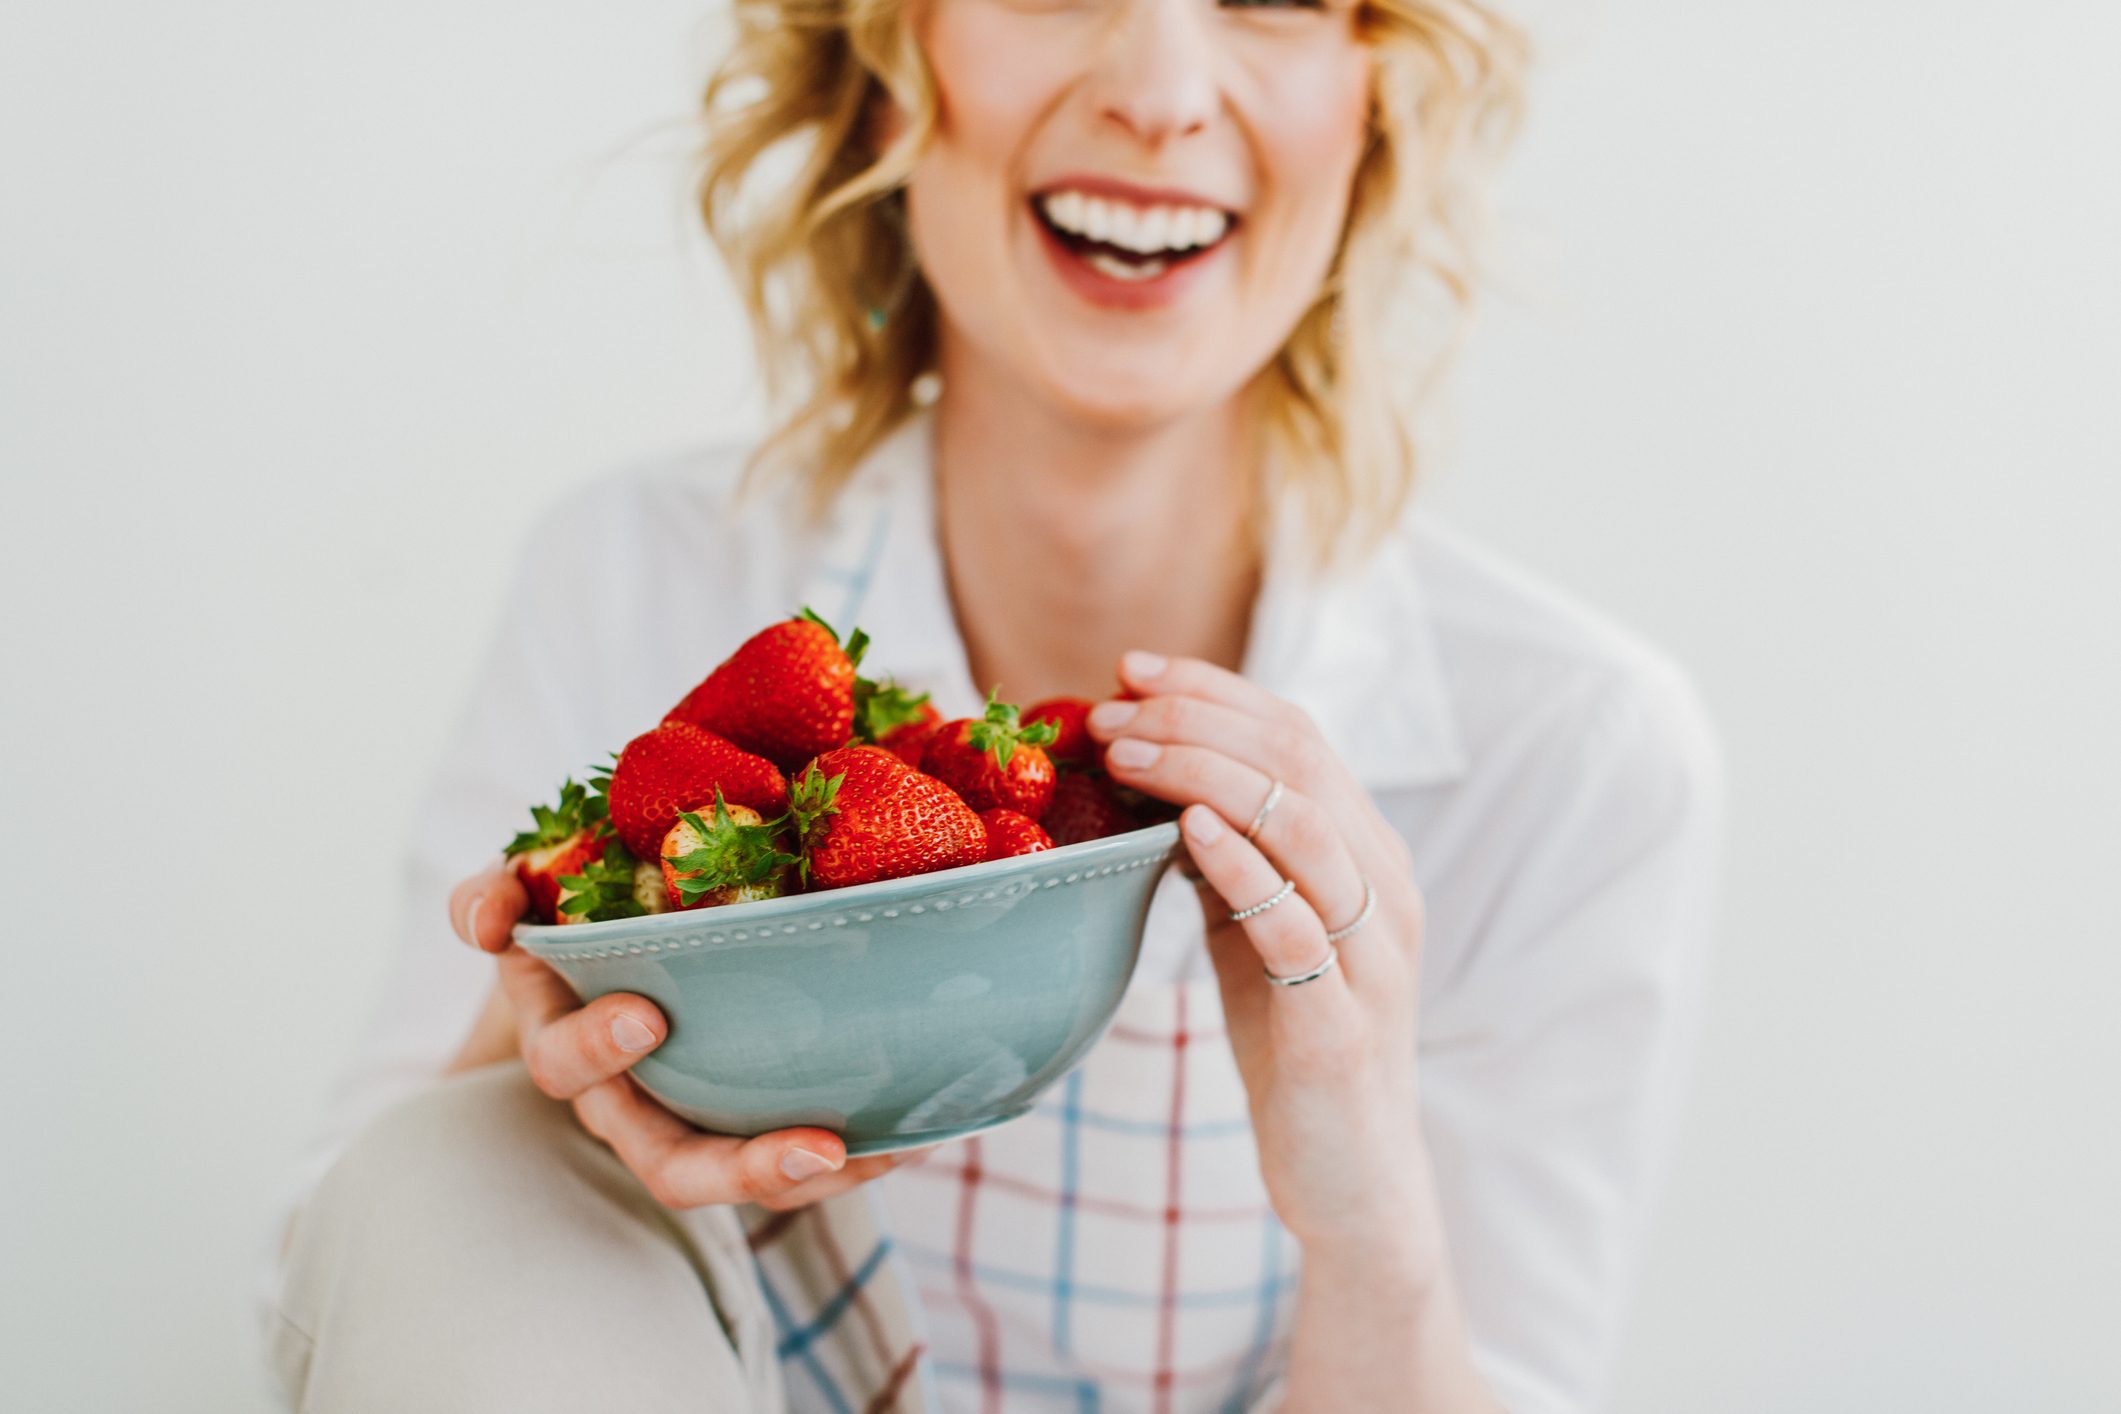 Should You Eat Strawberries? Their Nutrition Facts, Benefits, and More